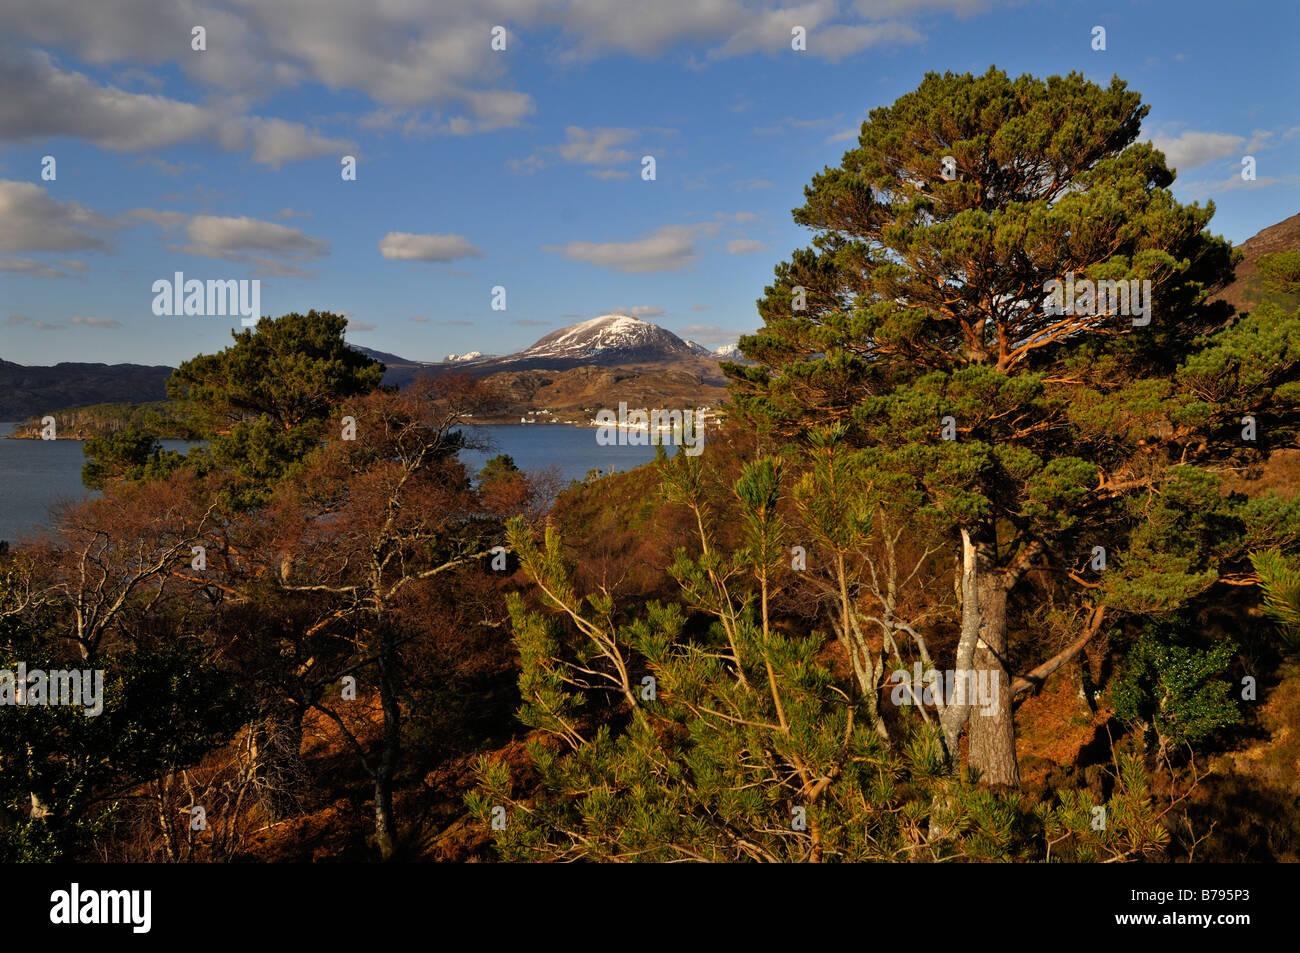 The distant snow capped peaks of Torridon rise beyond Loch Torridon and nearby pine woods and the village of Shieldaig W. Ross Stock Photo